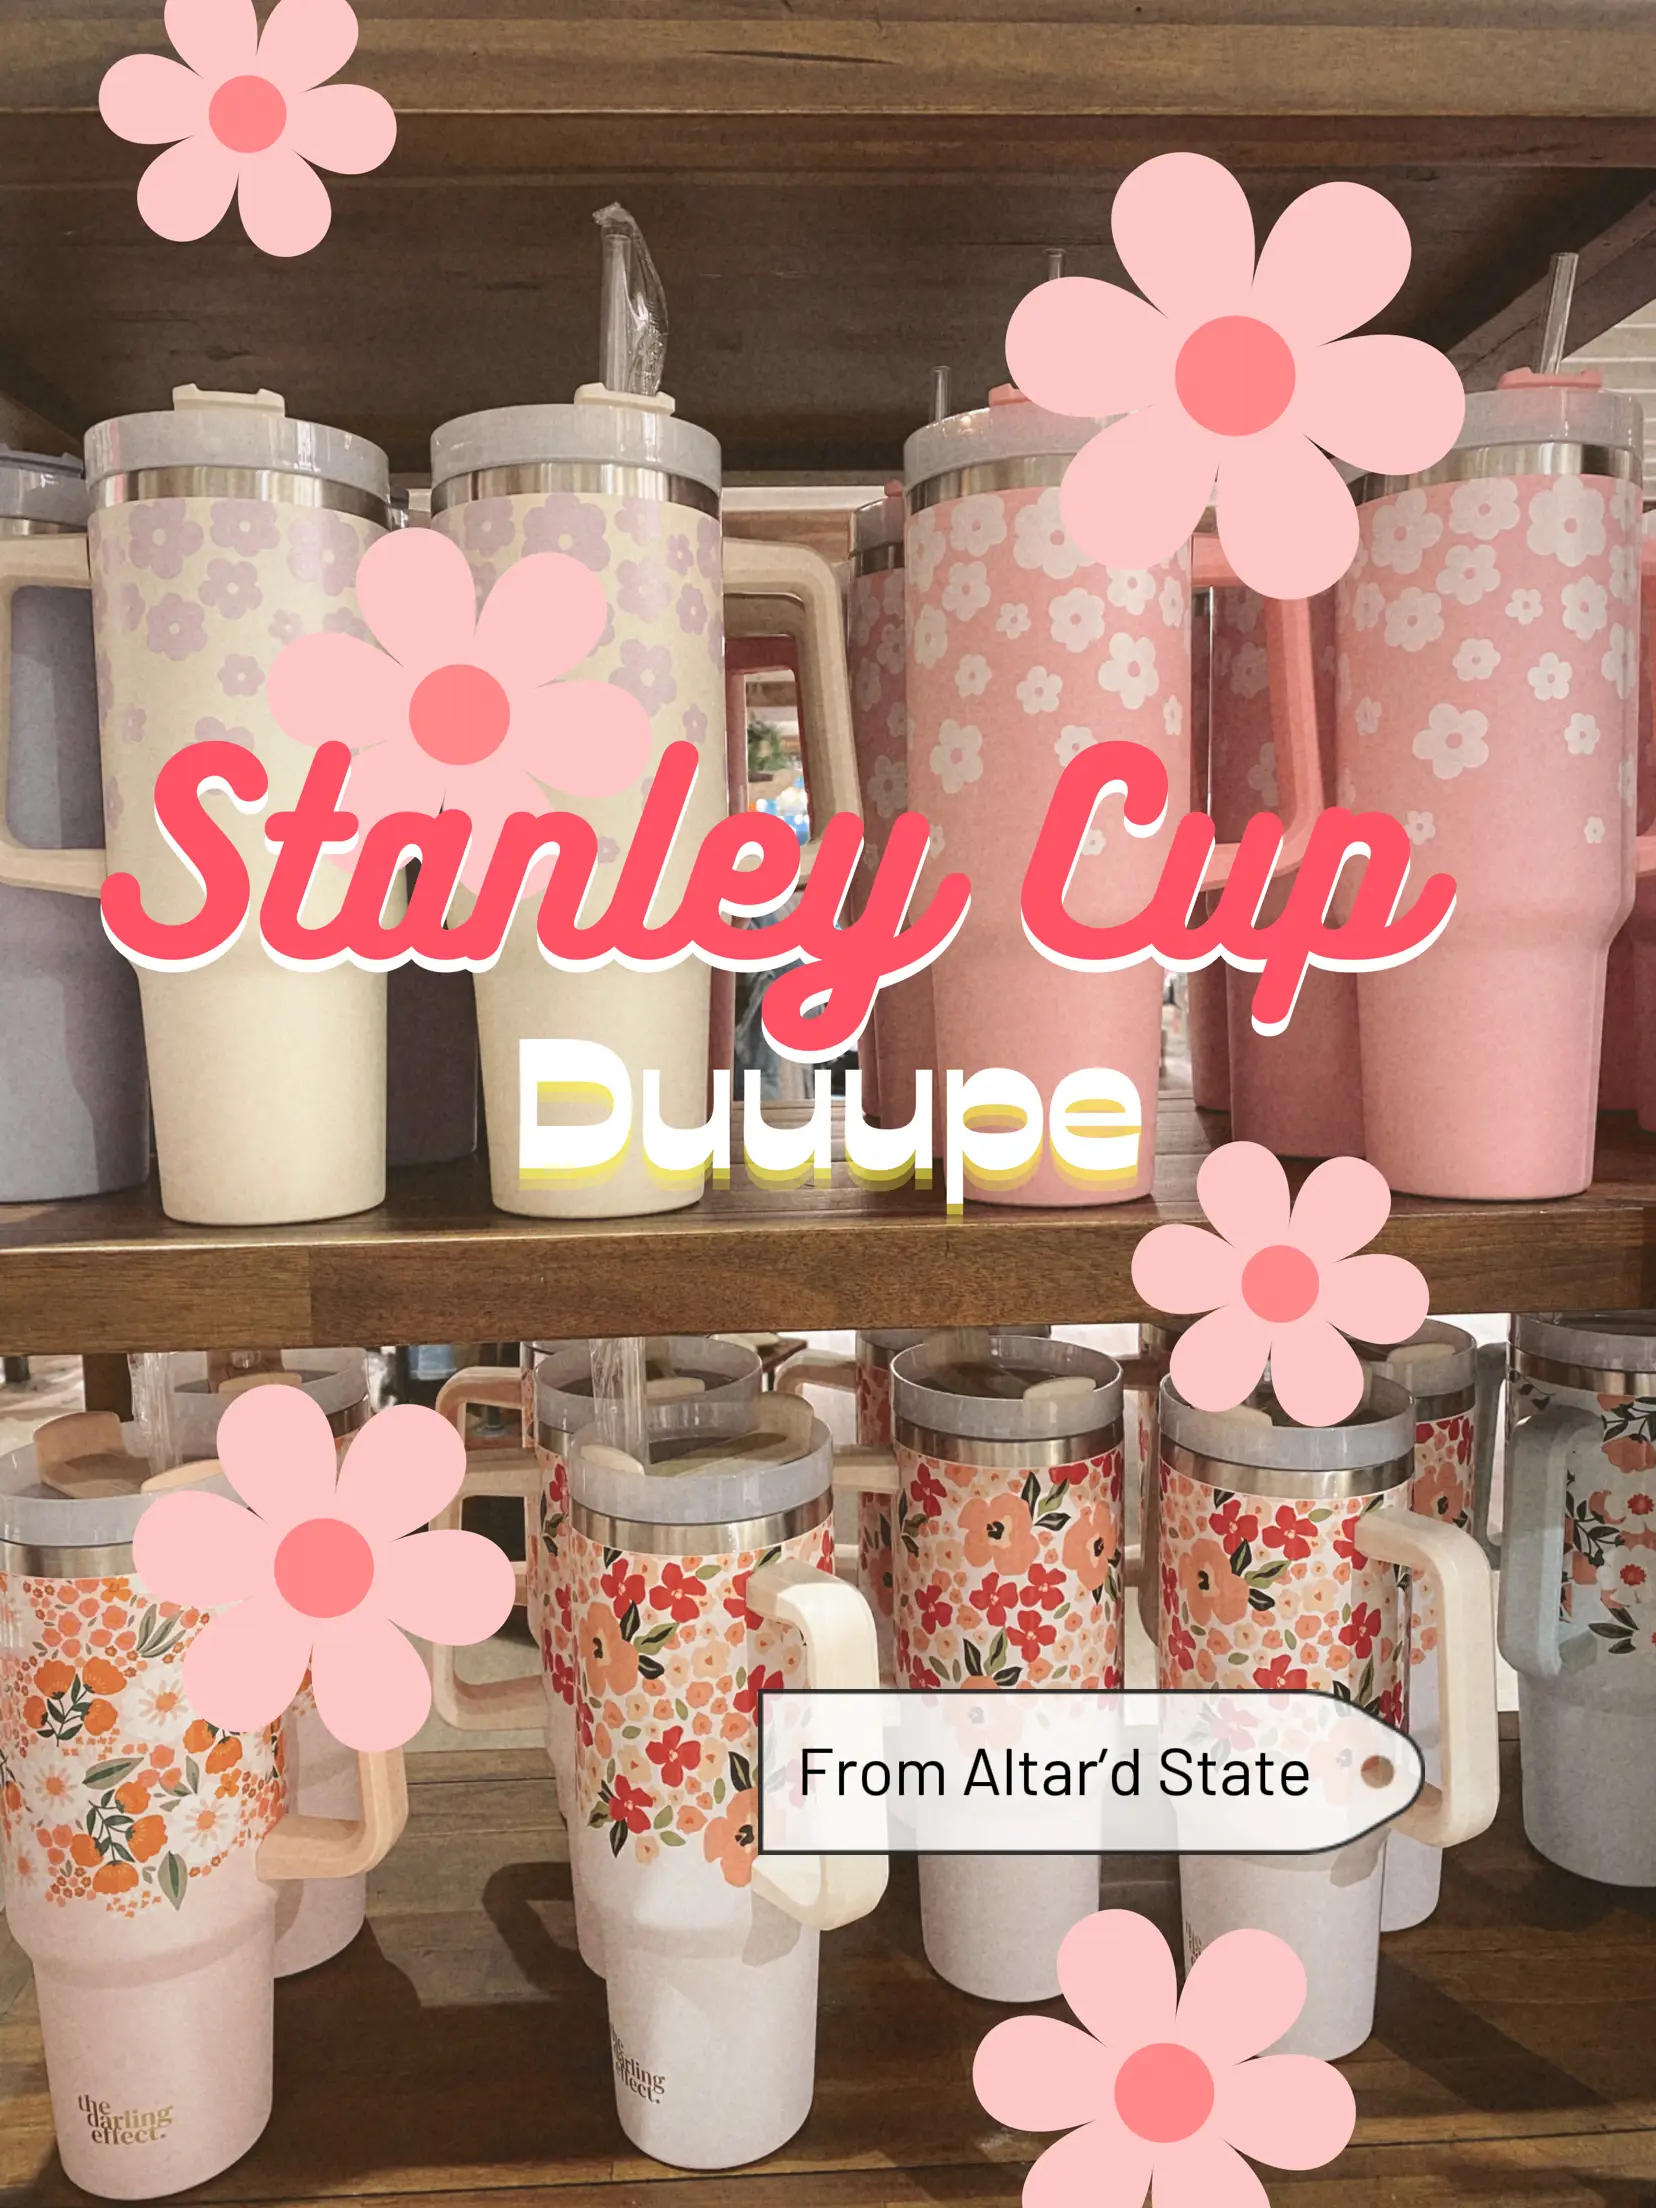 Pink Starbucks x Stanley cup dupes: Shop these 10 alternatives